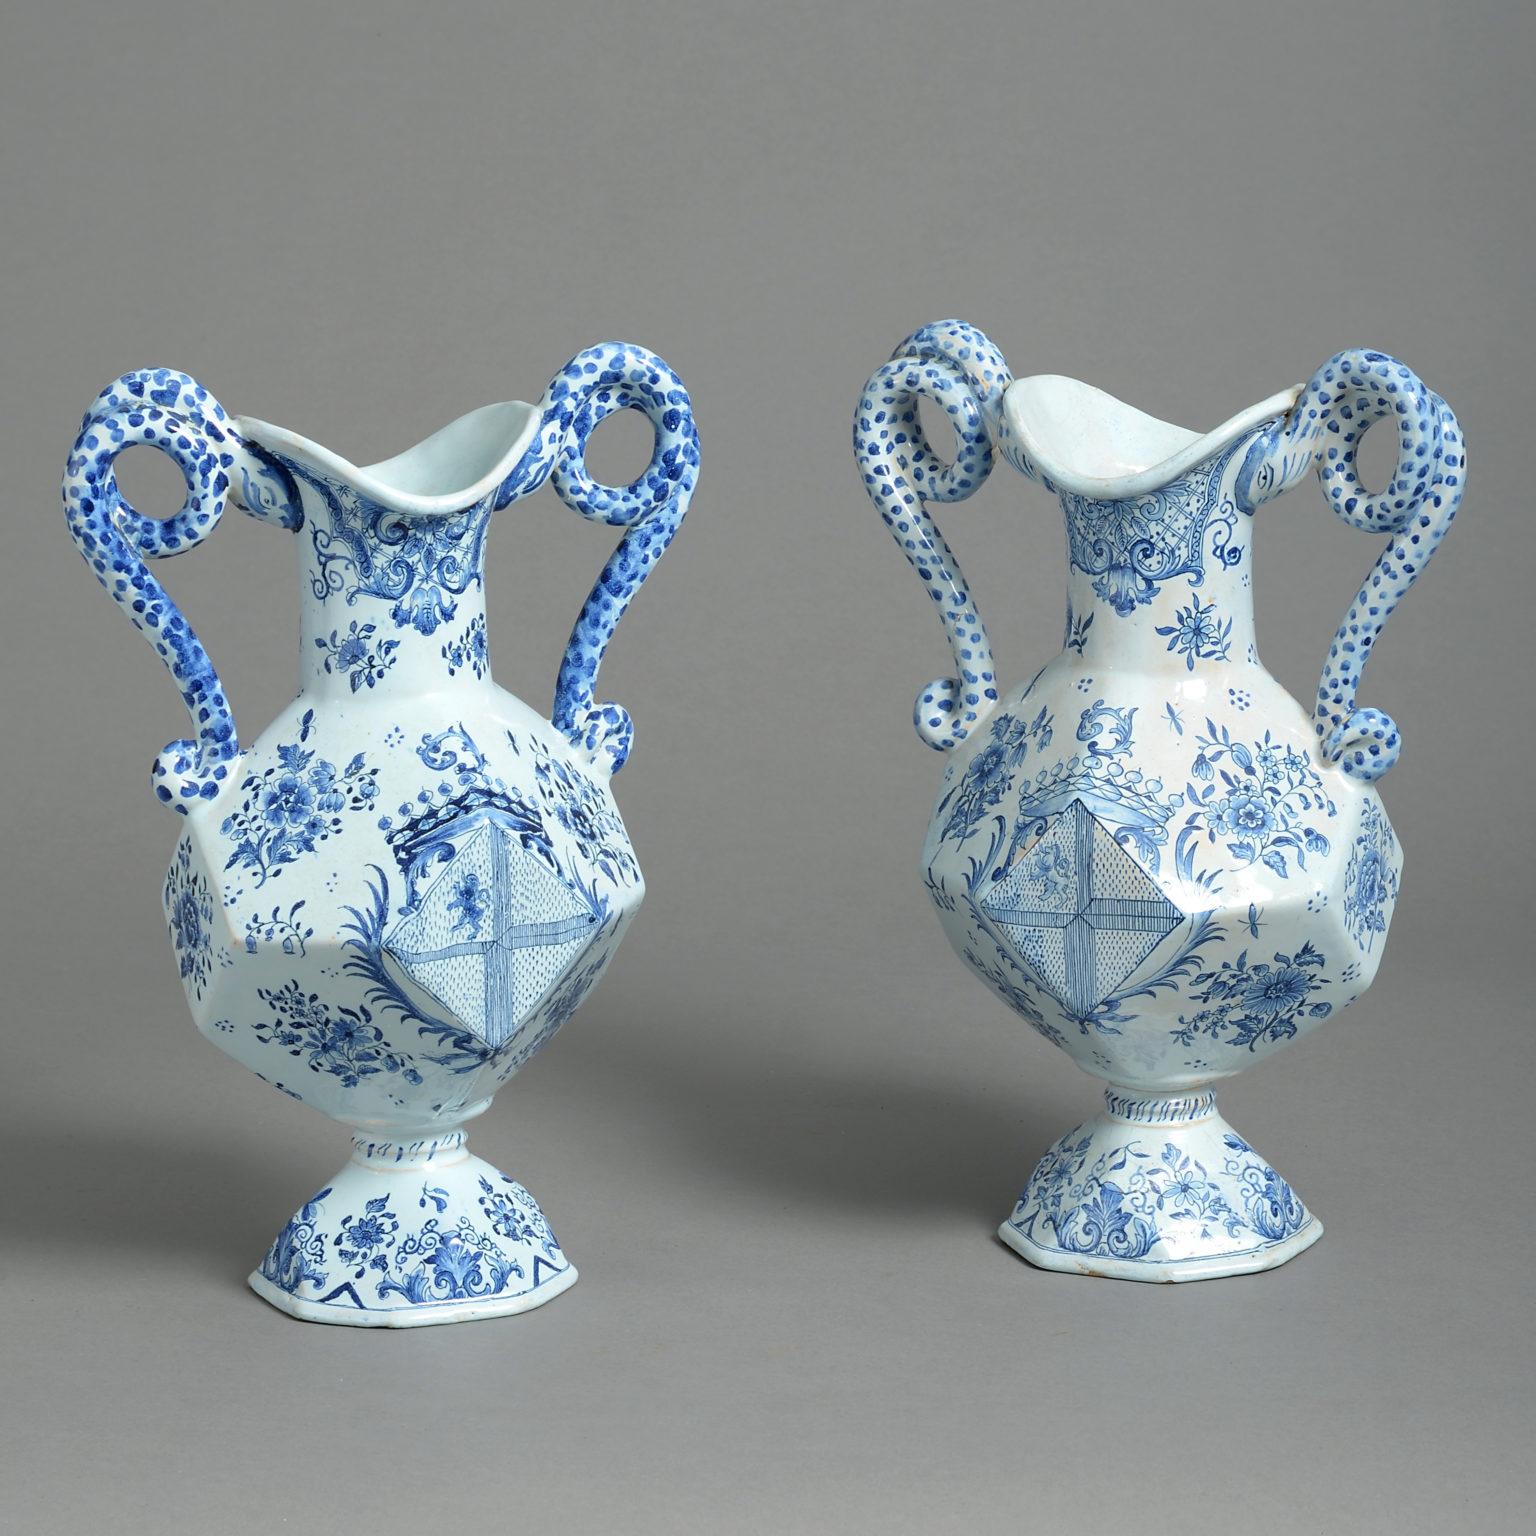 Baroque Pair of Blue and White Faience Pottery Vases